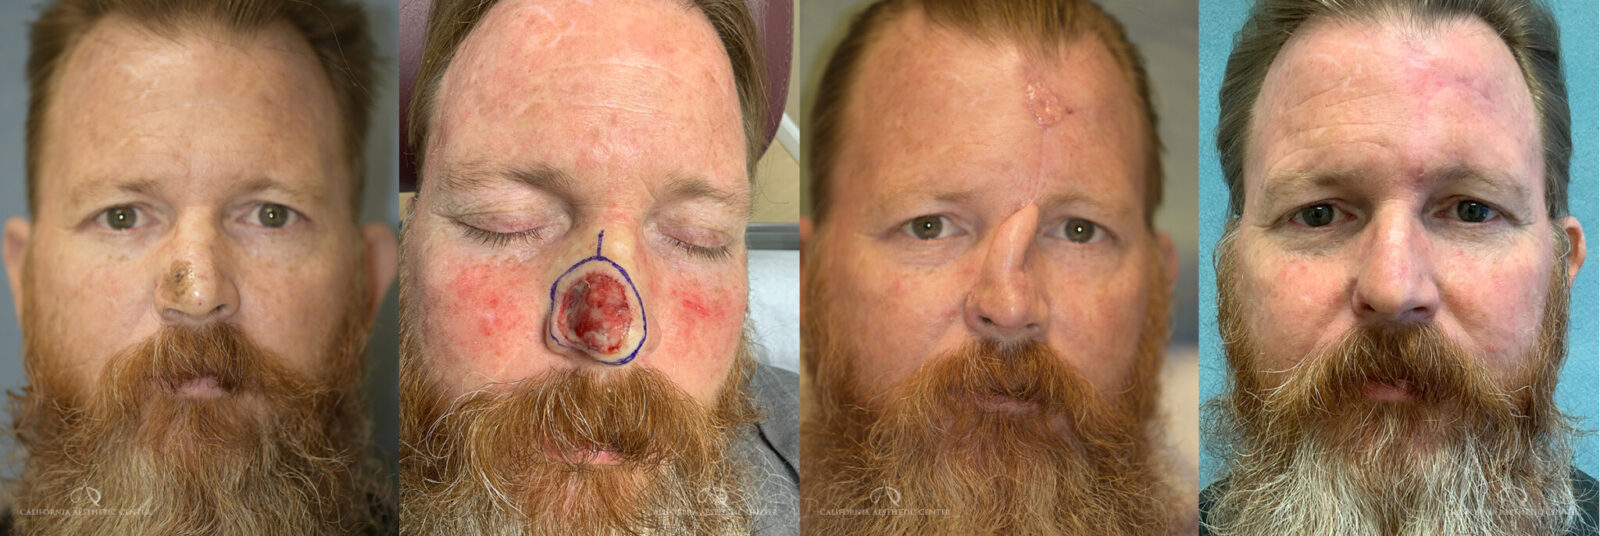 Patient 1 Skin Flap Before and After Front Big Photo